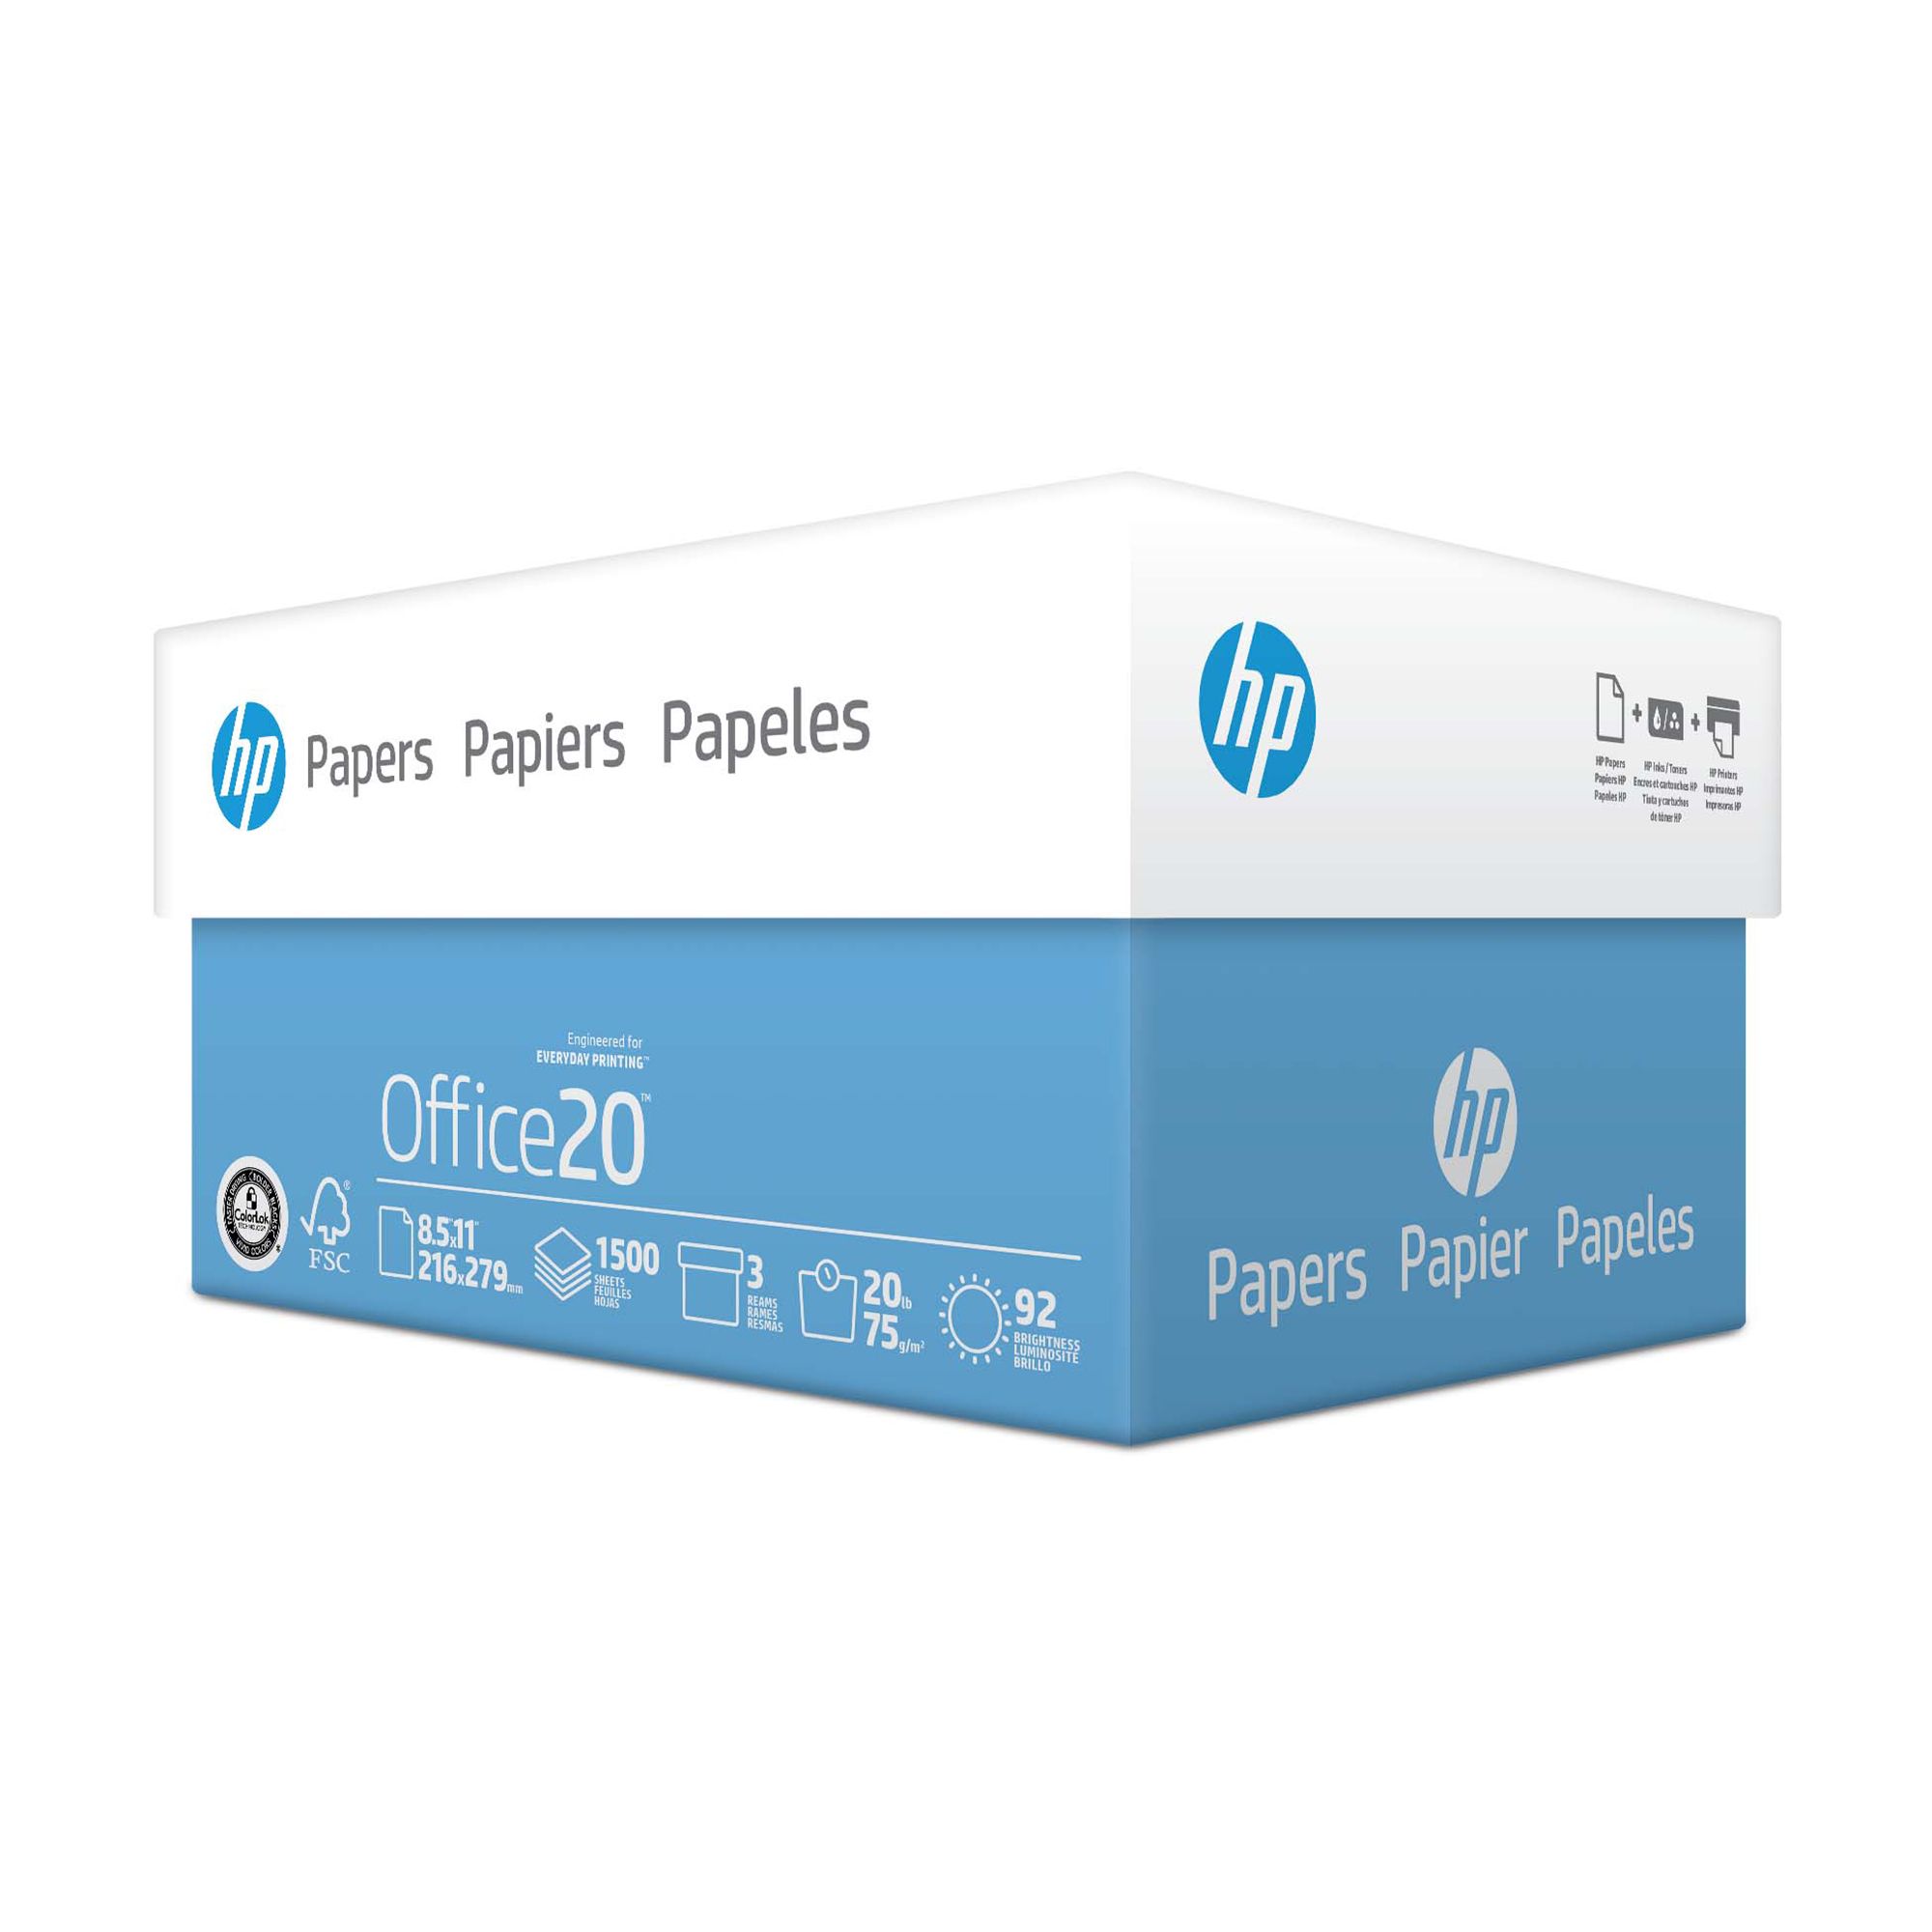 HP Paper, Everyday Copy & Print, 20 lb, Value Pack - 750 sheets